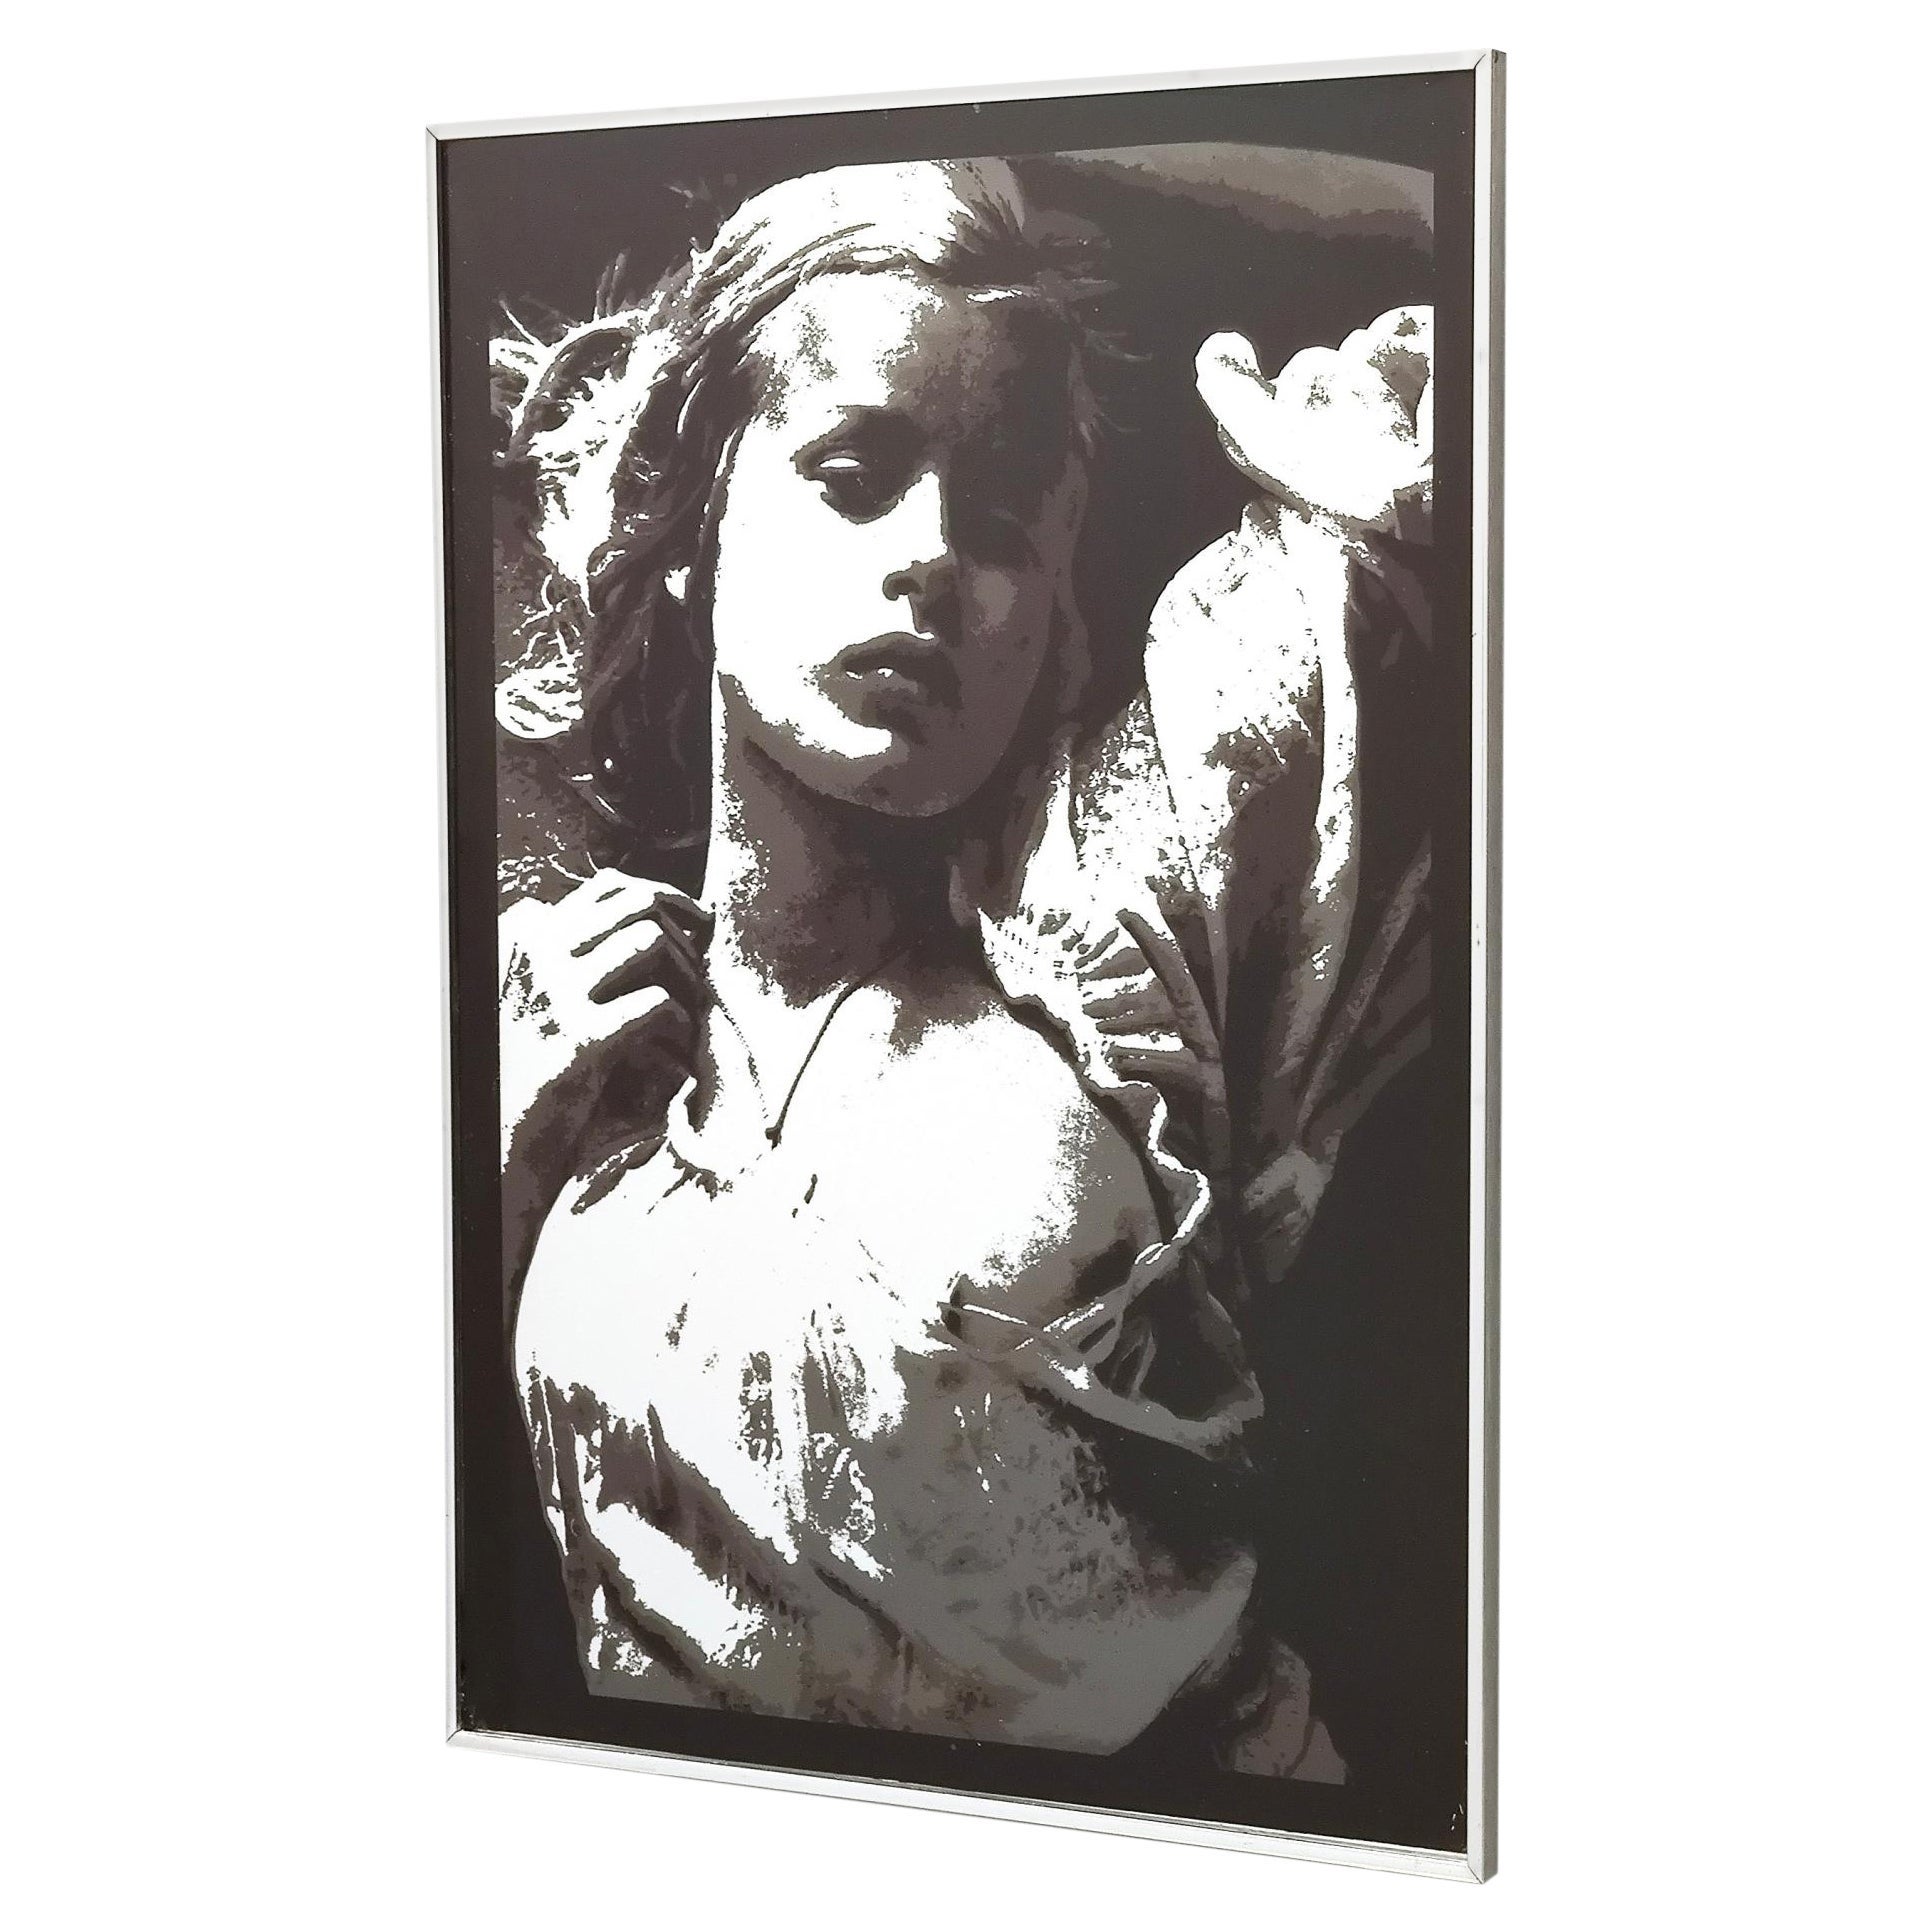 Serigraphy on Rectangular Mirror with a Photo by David Hamilton, 1970s-1980s For Sale